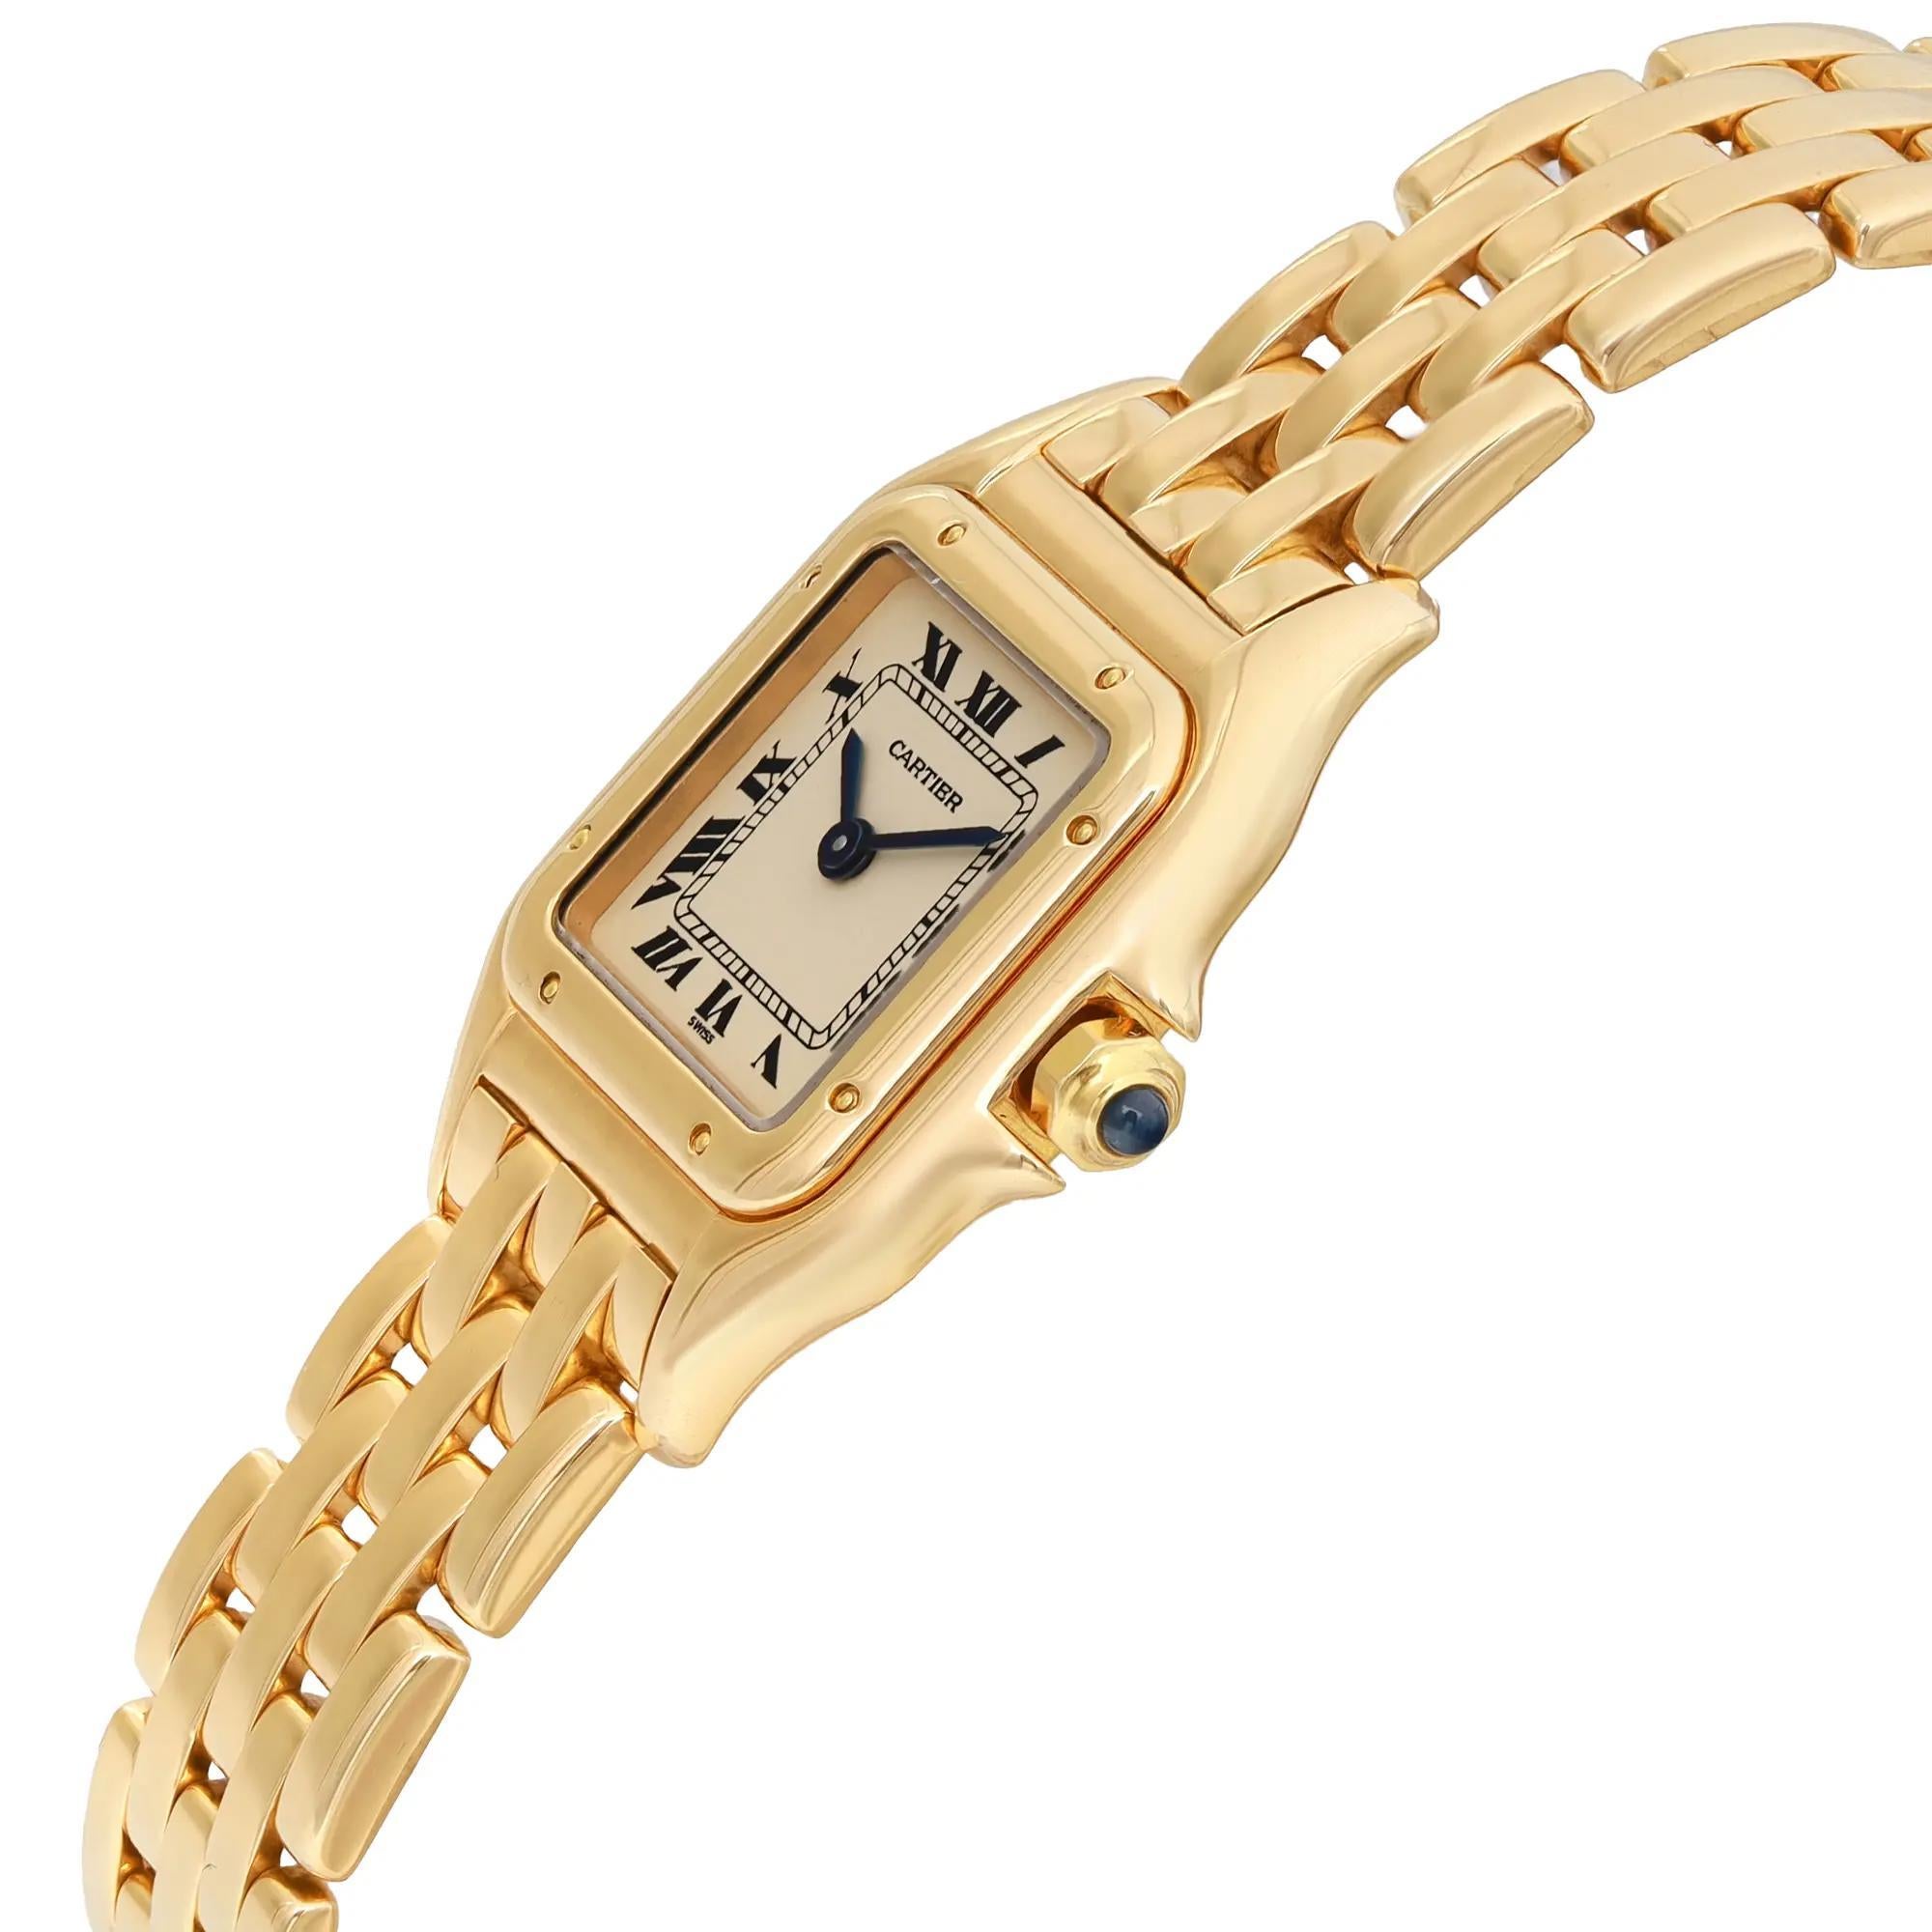 Cartier Panthere 22mm 18K Yellow Gold Cream Dial Quartz Ladies Watch 8669 In Excellent Condition For Sale In New York, NY